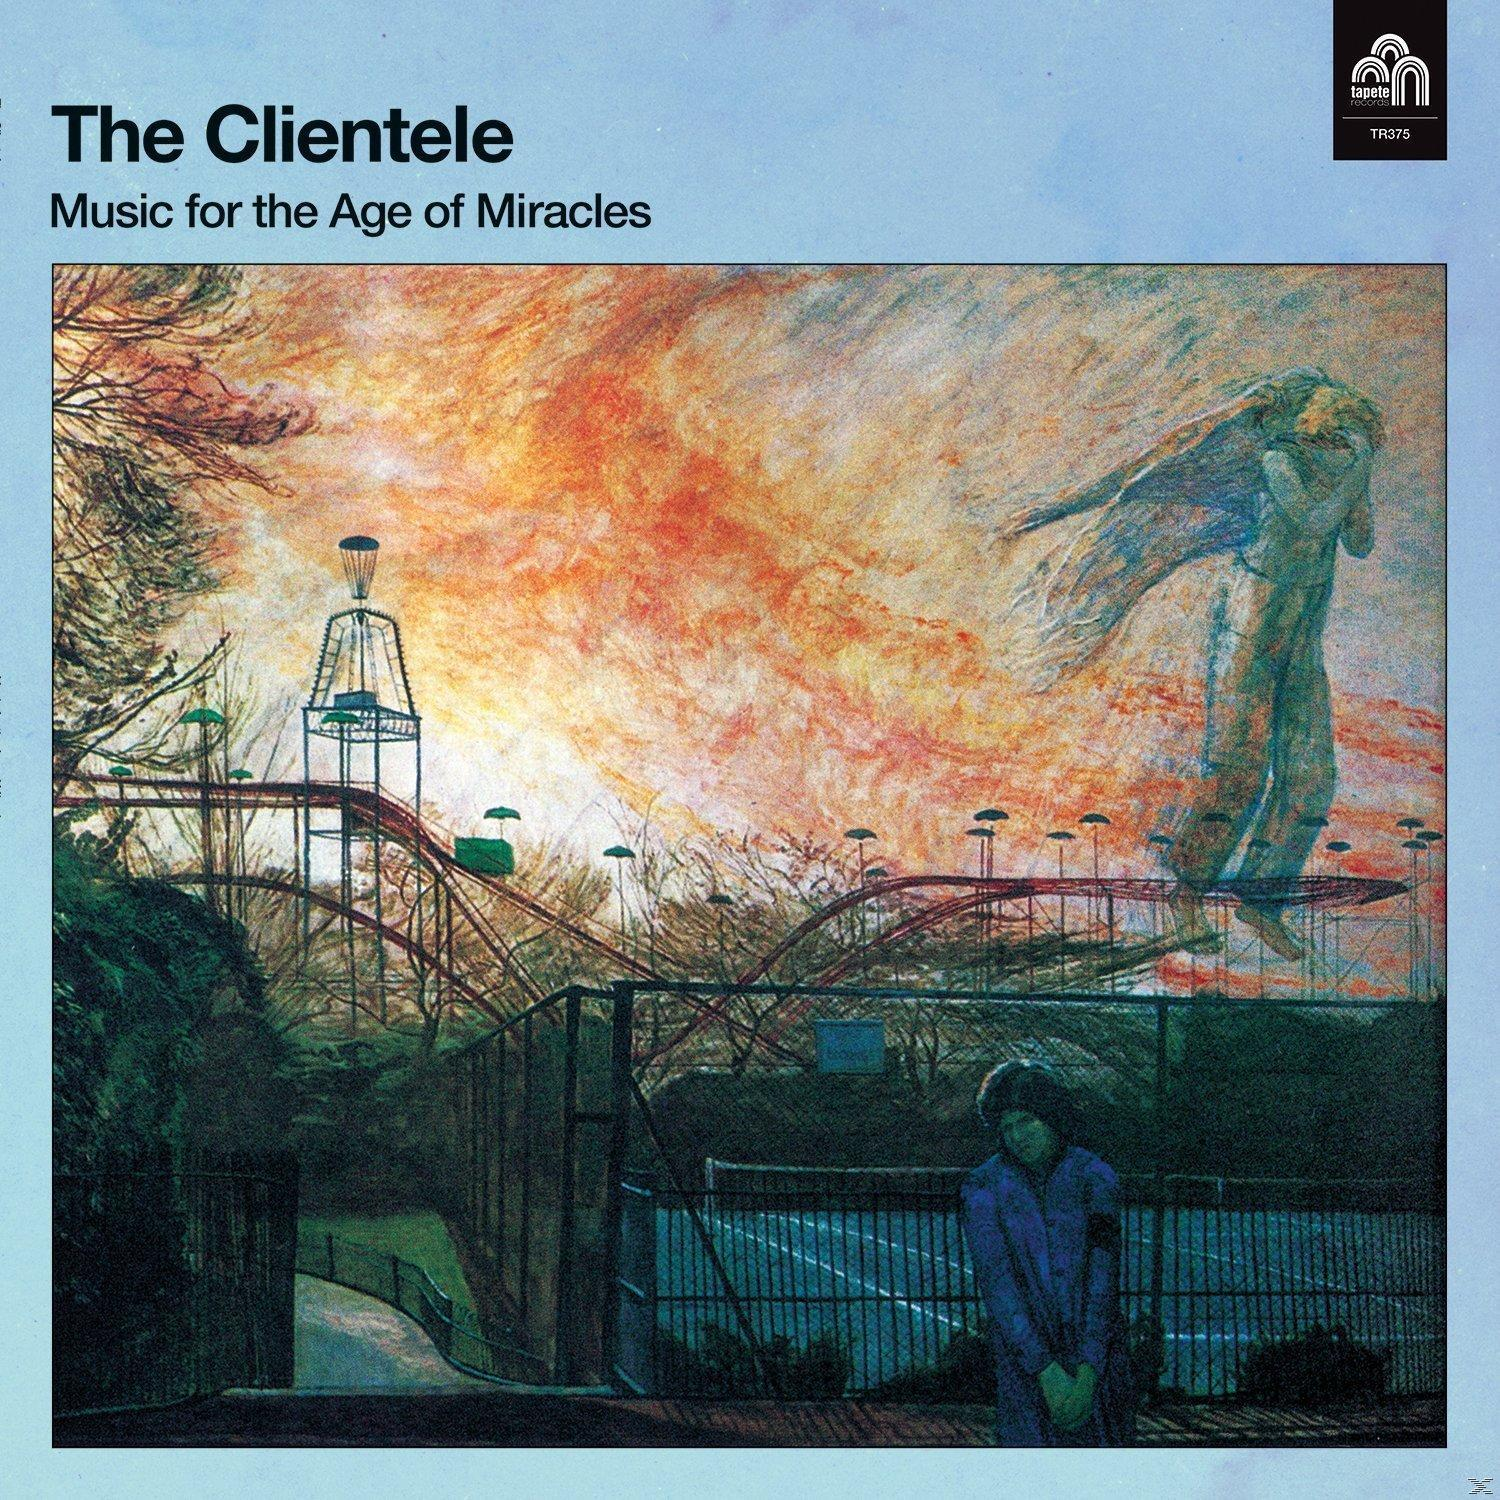 Age - Of The Miracles For The Clientele (CD) Music -